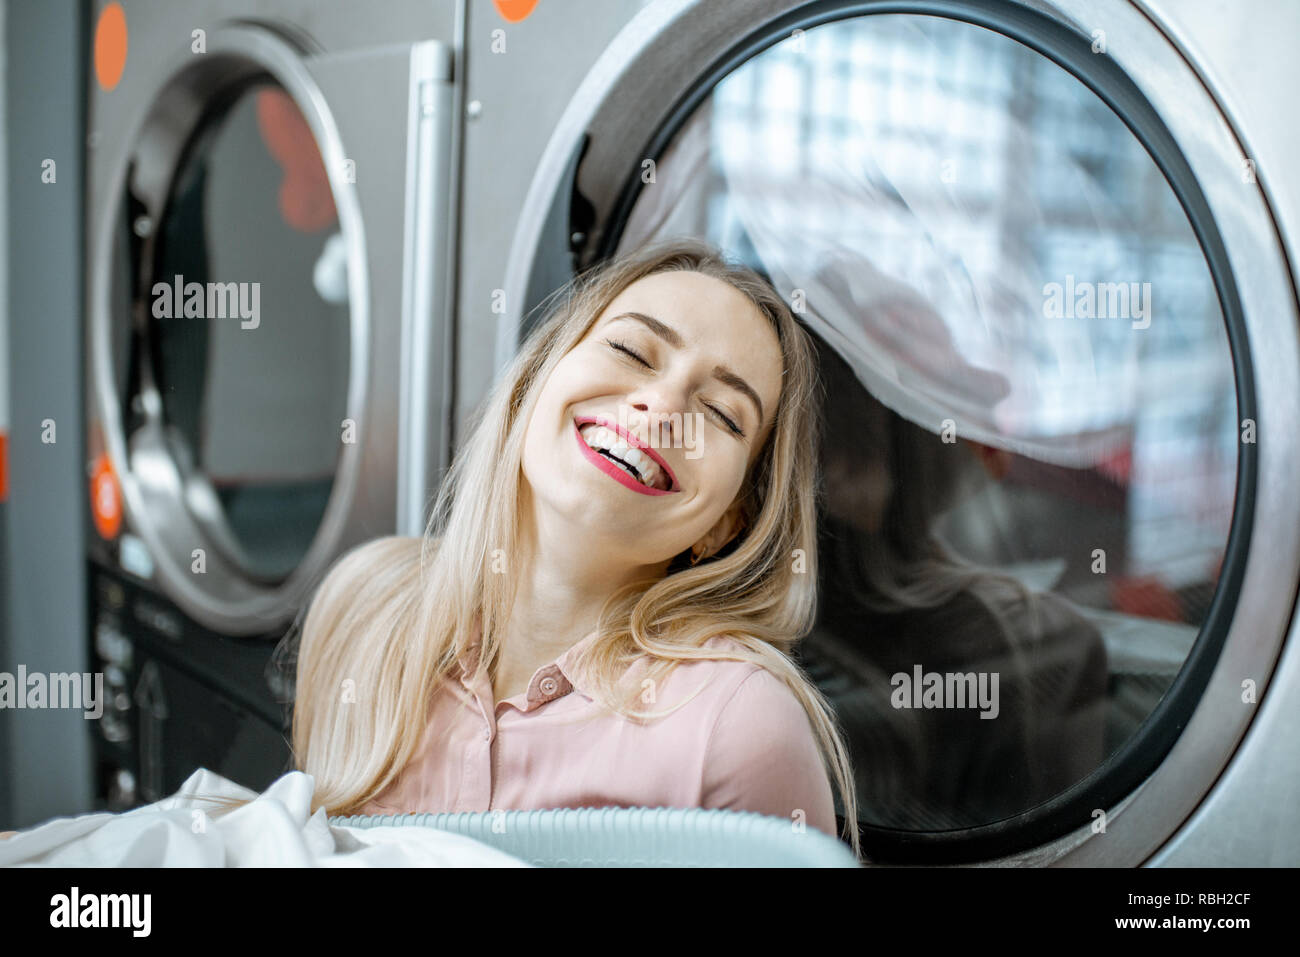 Young and cheerful woman enjoying the washing process standing near professional drying machine in the laundry Stock Photo